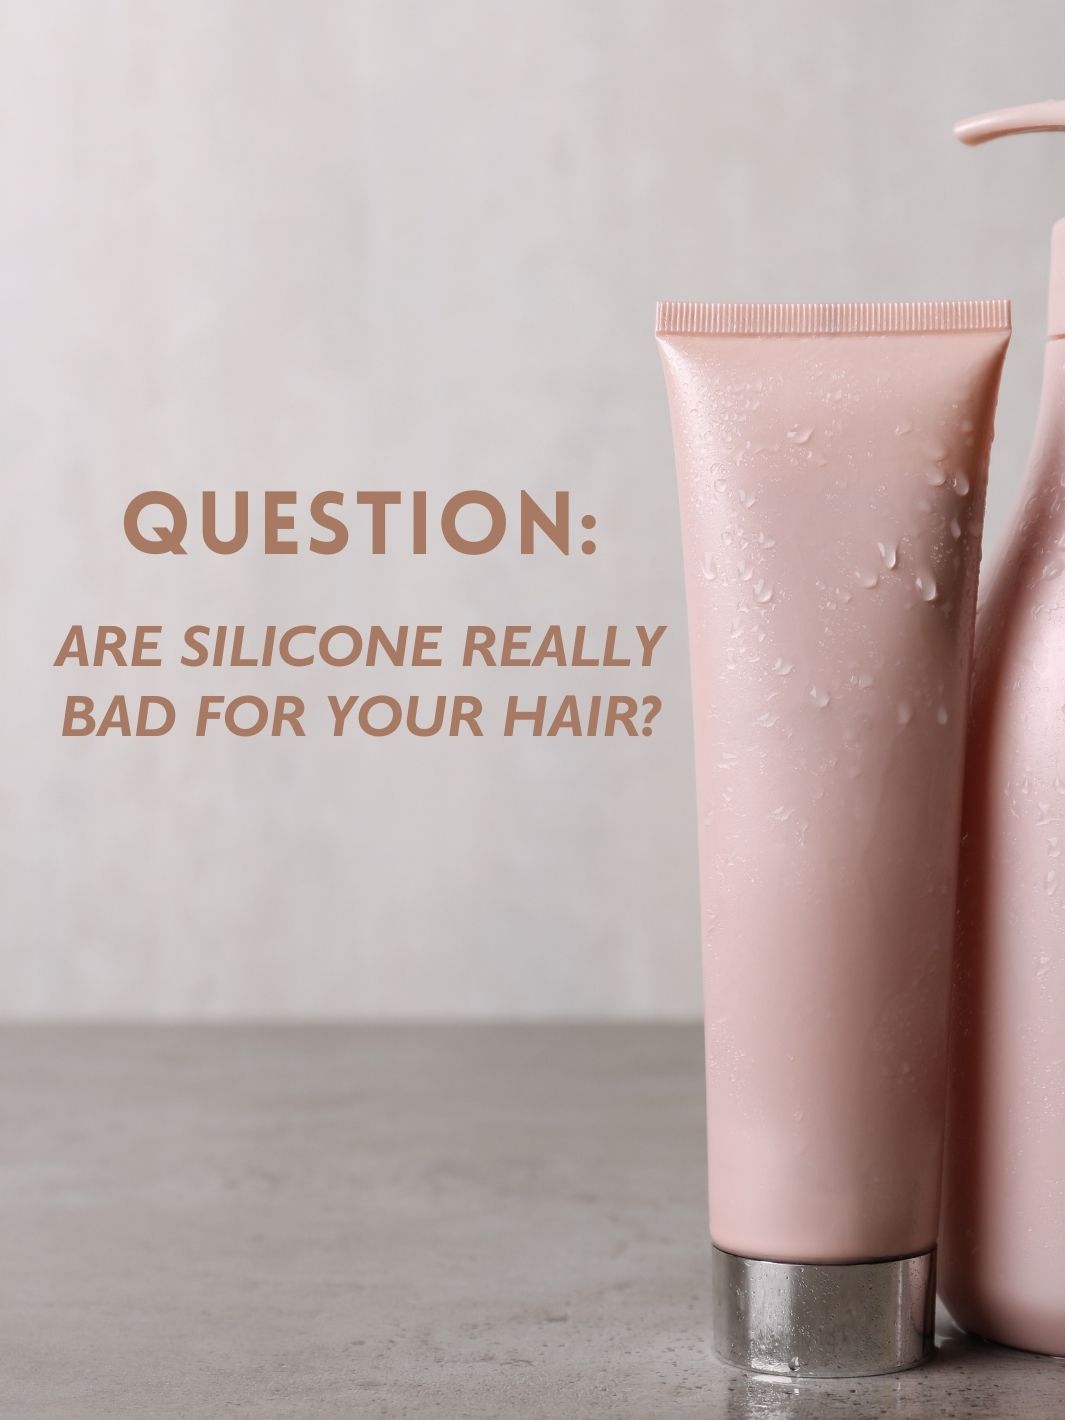 Are Silicone Bad for Your Hair?